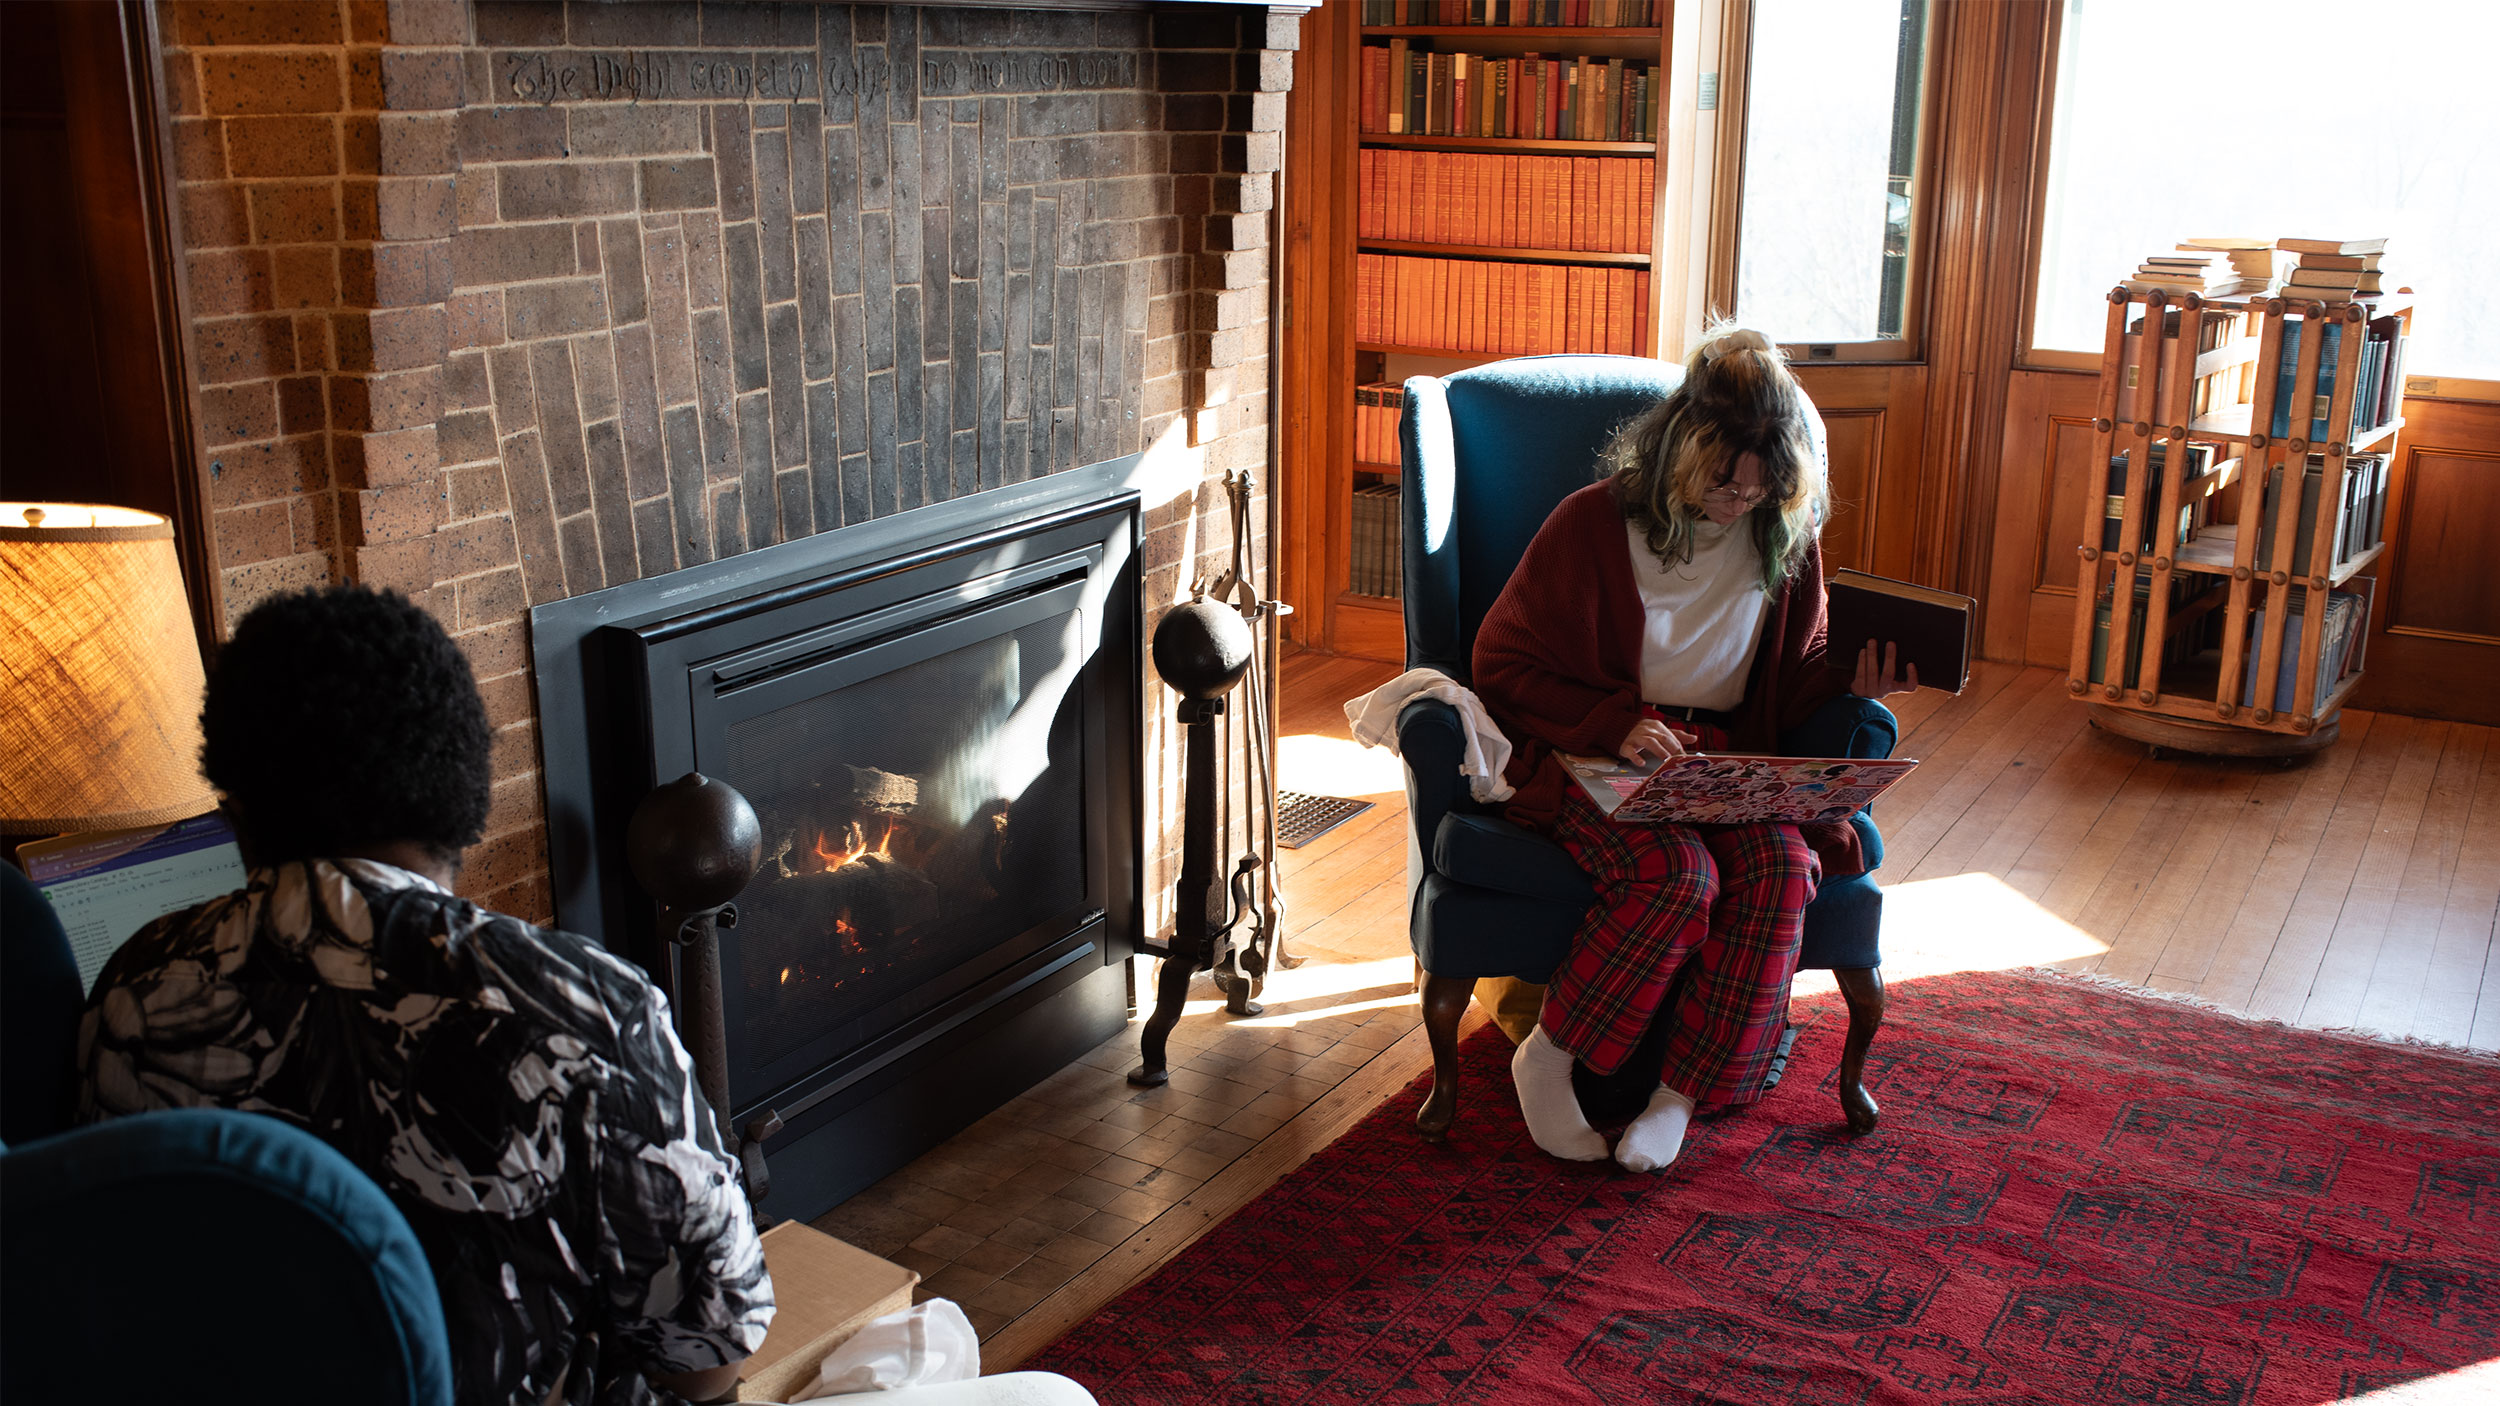 two students sit in chairs in front of a brick-surrounded fireplace in the library of an old estate